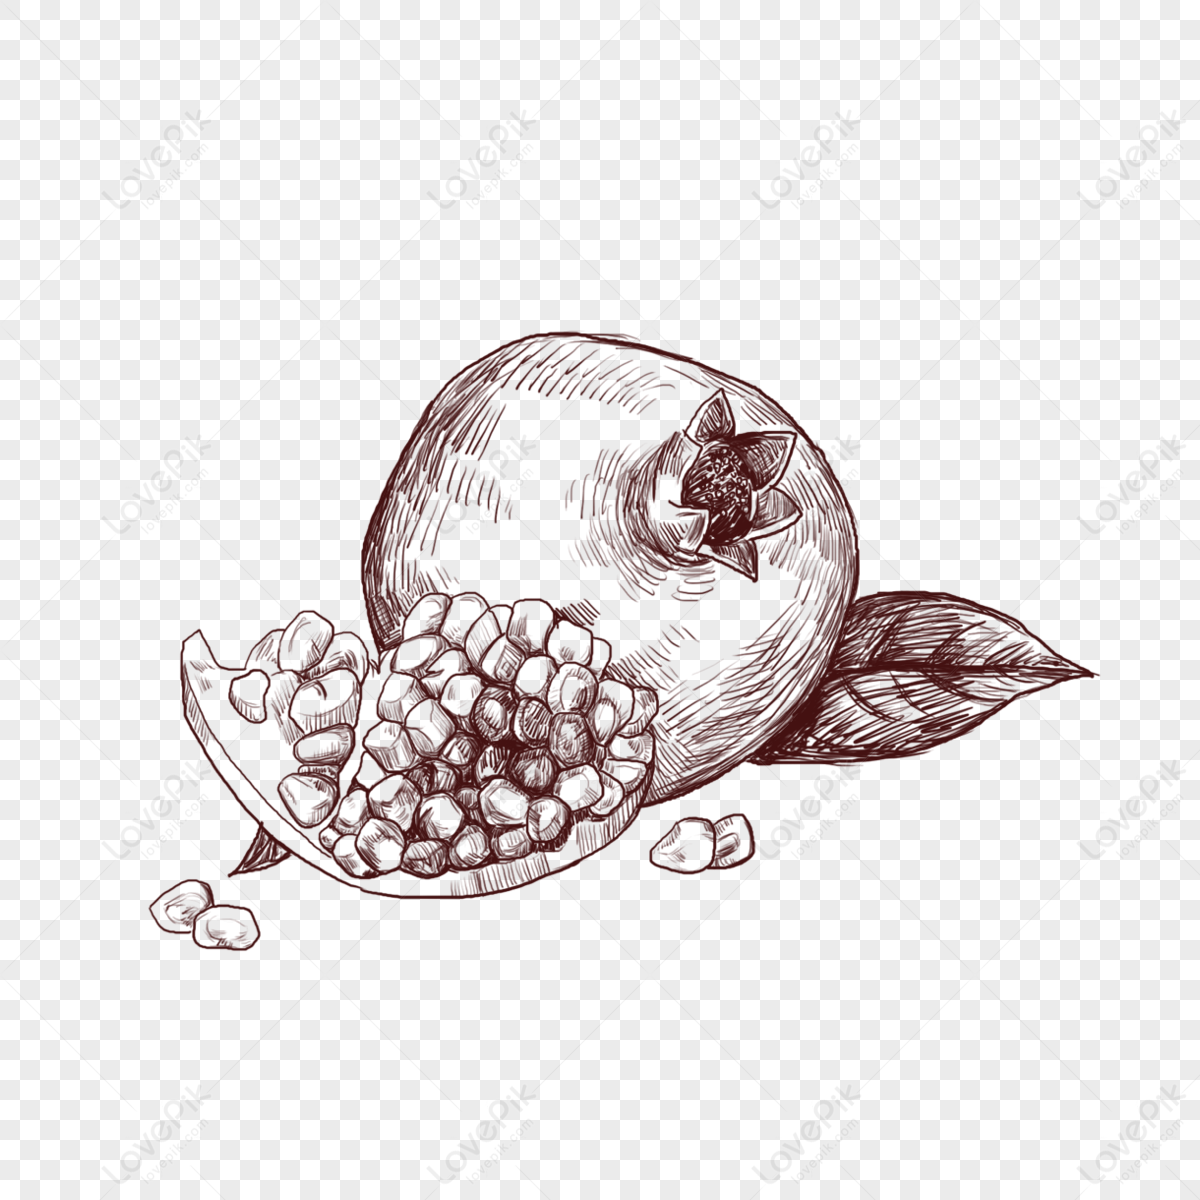 How To Draw A Pomegranate - Easy And Simple Steps | - YouTube